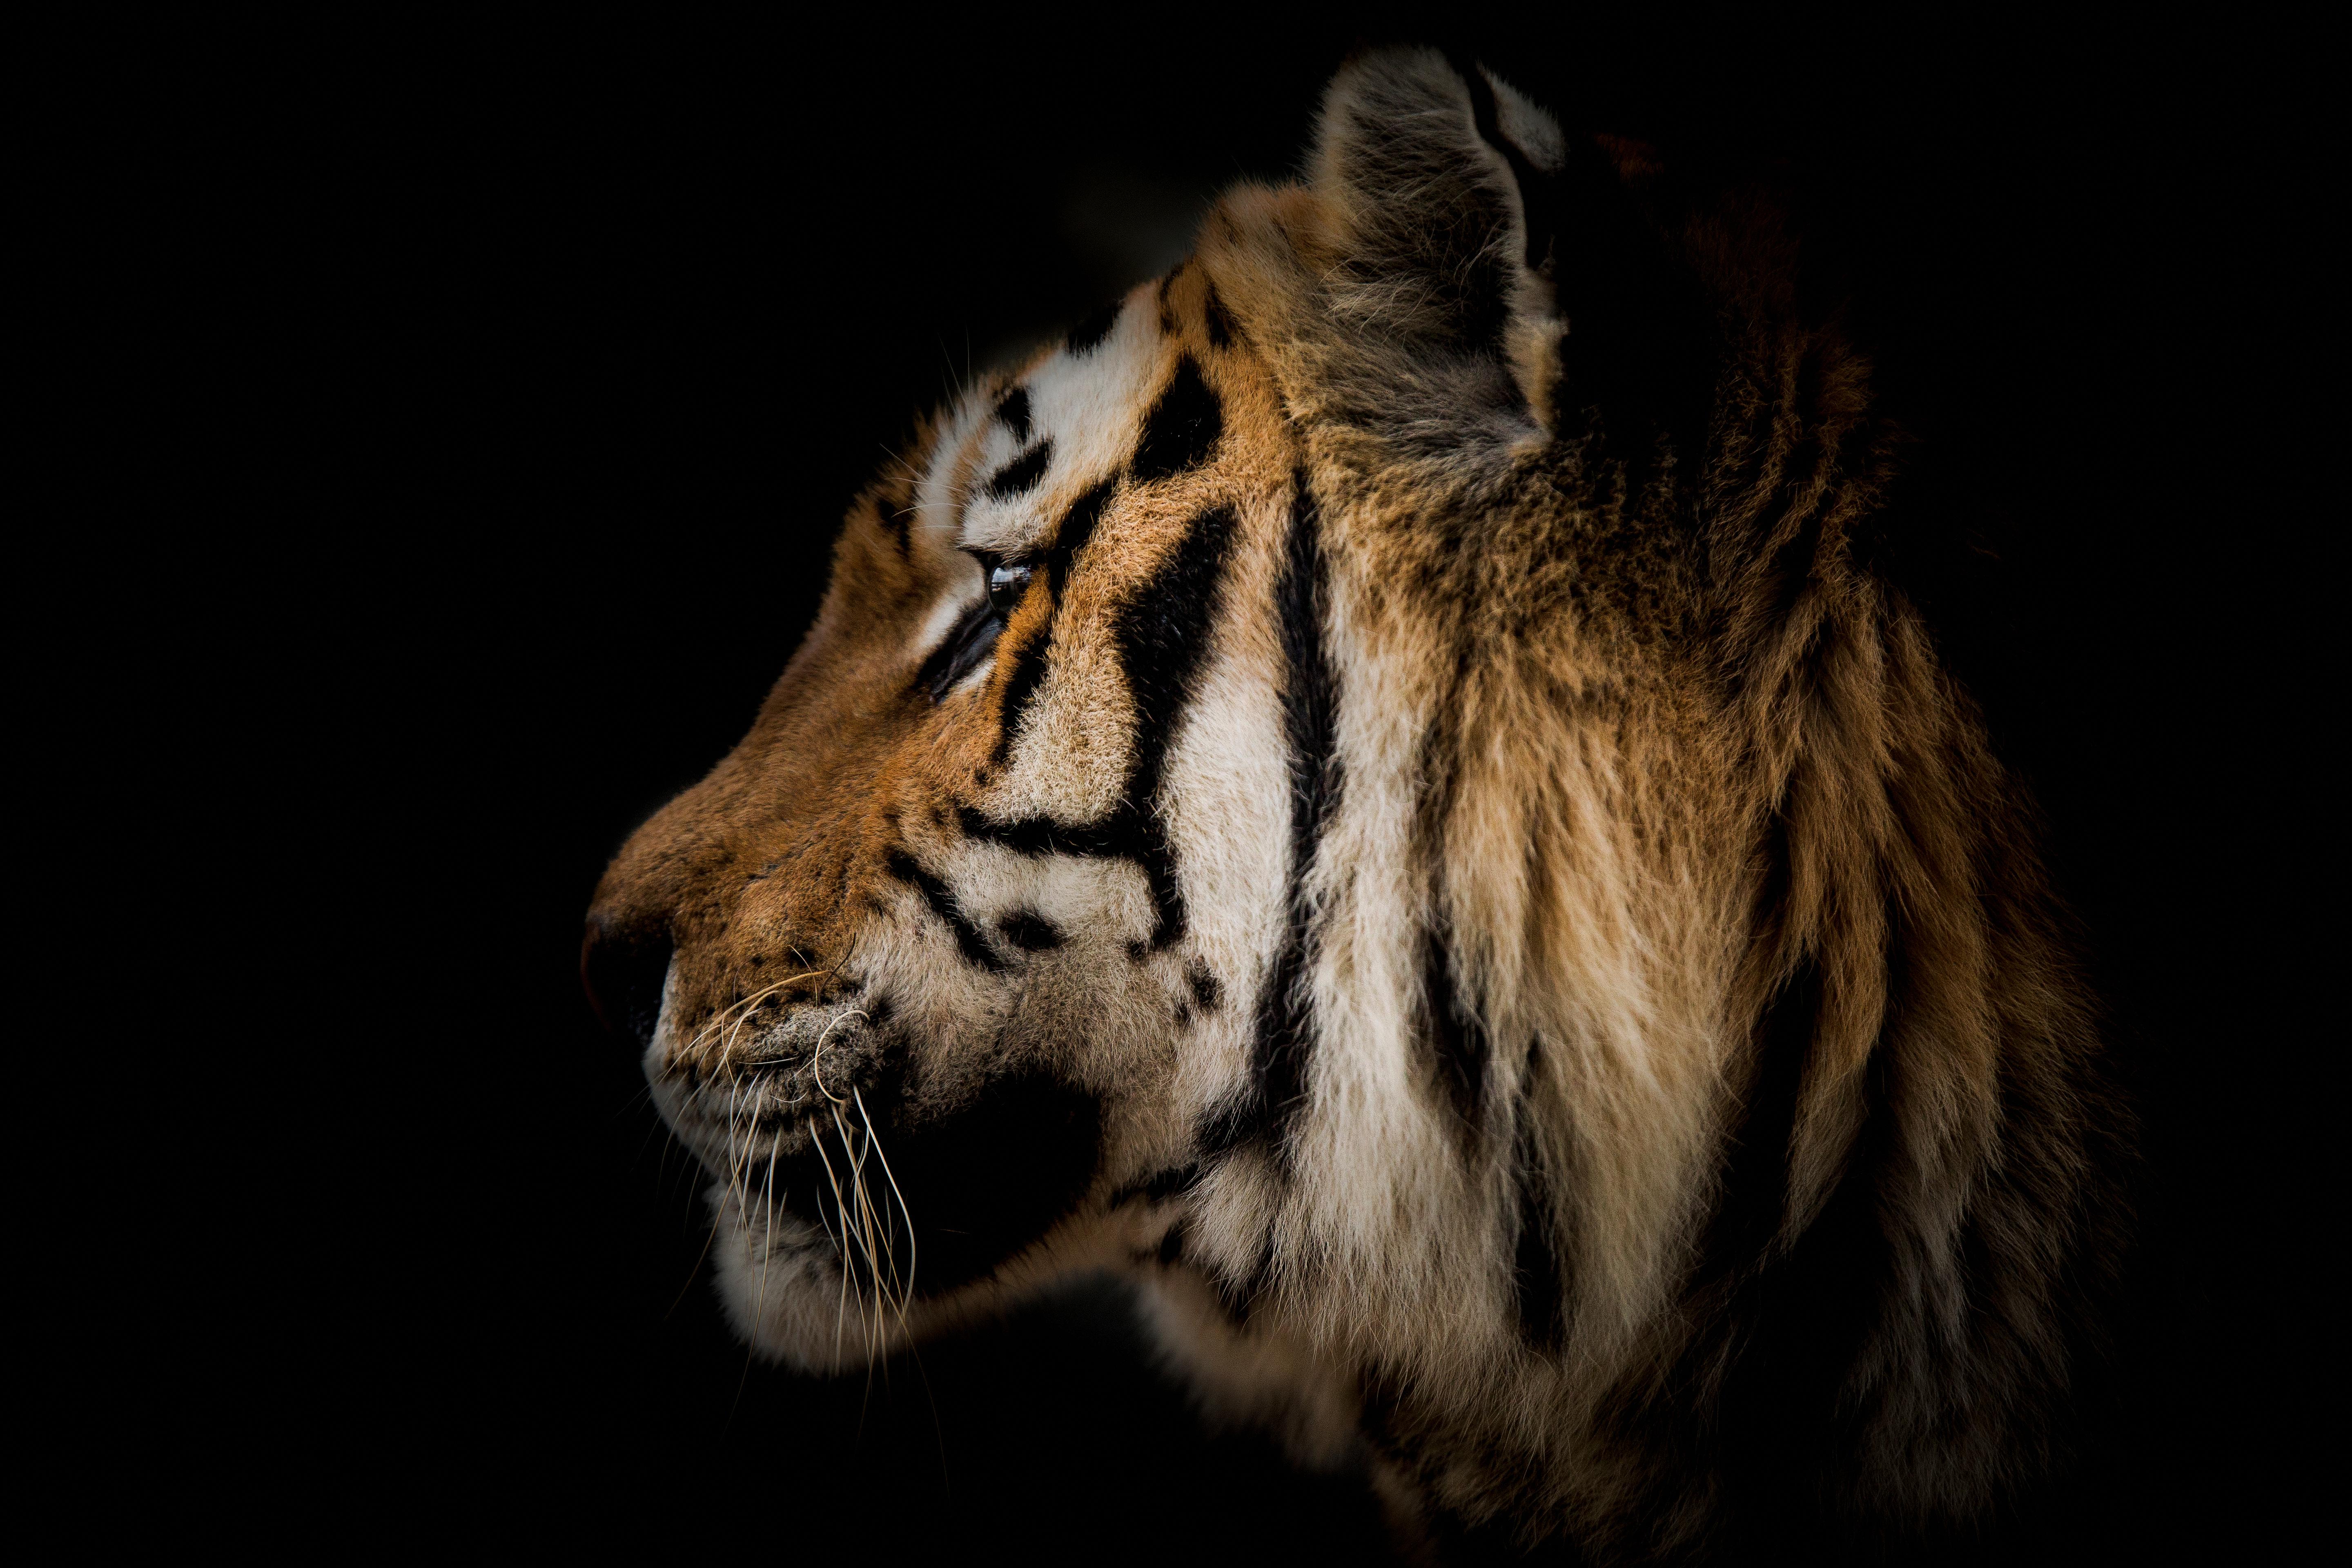 Shane Russeck Black and White Photograph -  Photography of Tiger Wildlife Art Photograph "Tiger Portrait" Fine Art 60x40